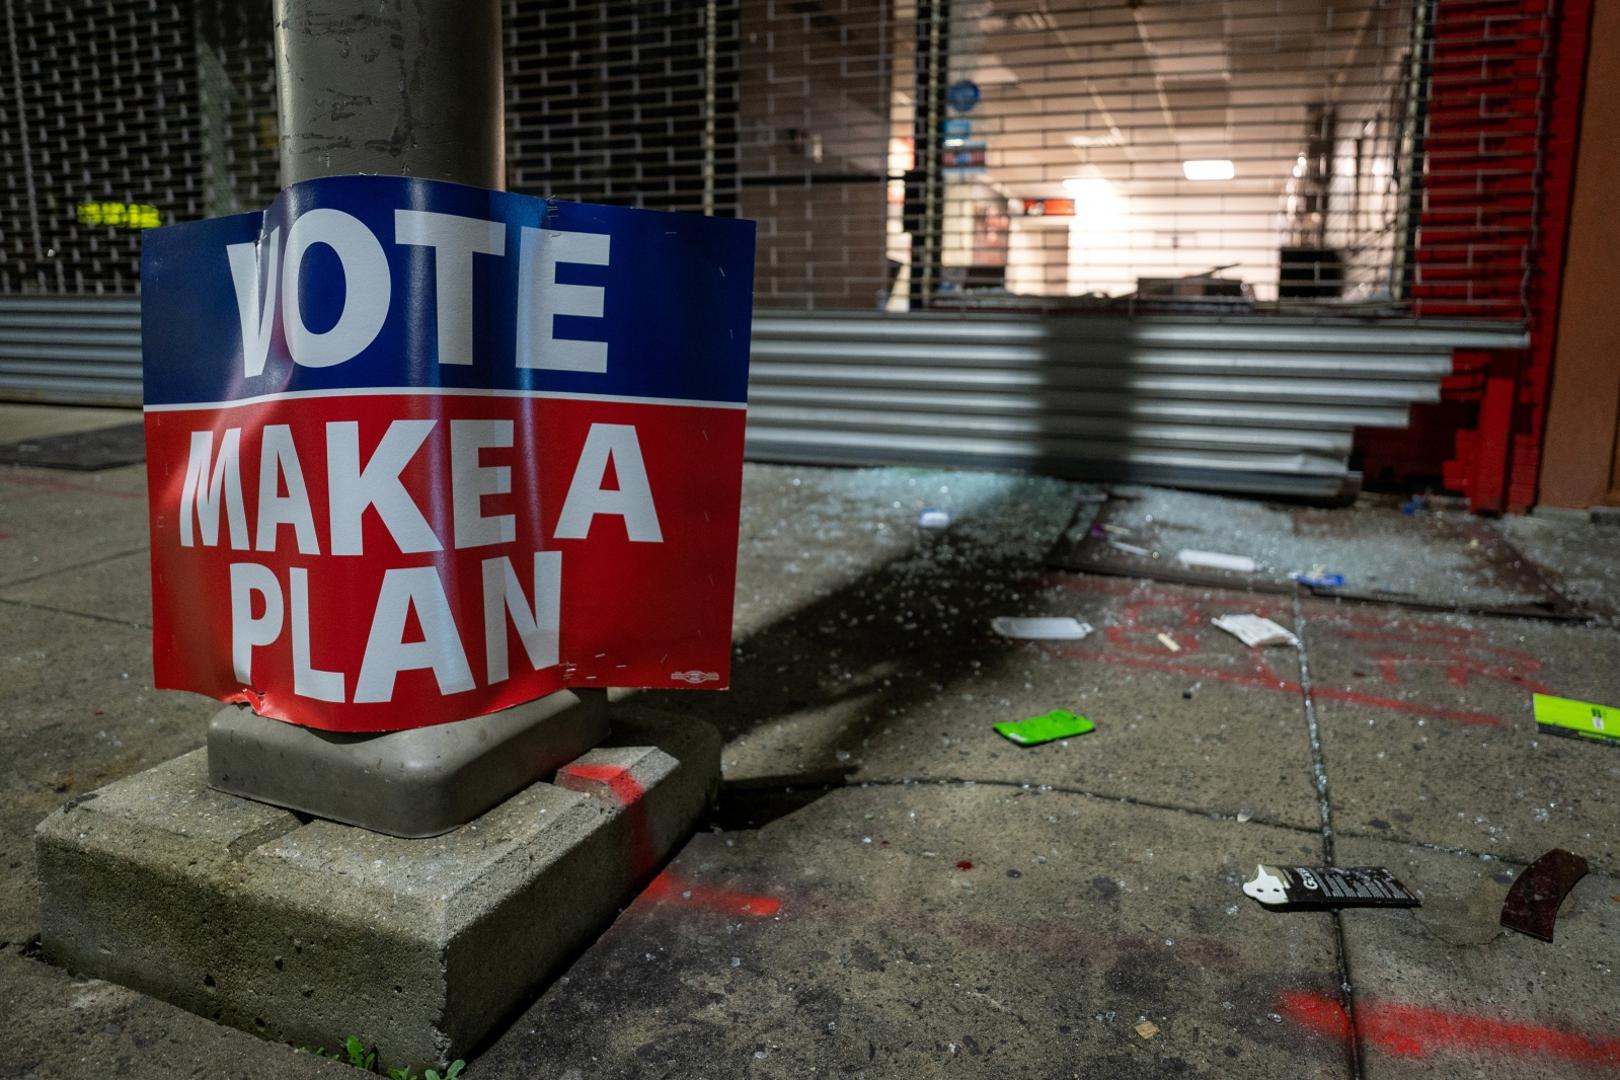 Protests flare in Philadelphia after police fatally shoot Black man A sign that reads "Vote - make a plan" is seen outside of a looted cellphone store following protests over the police shooting death of Walter Wallace in Philadelphia, Pennsylvania, U.S., October 27, 2020.  REUTERS/David 'Dee' Delgado DAVID DELGADO